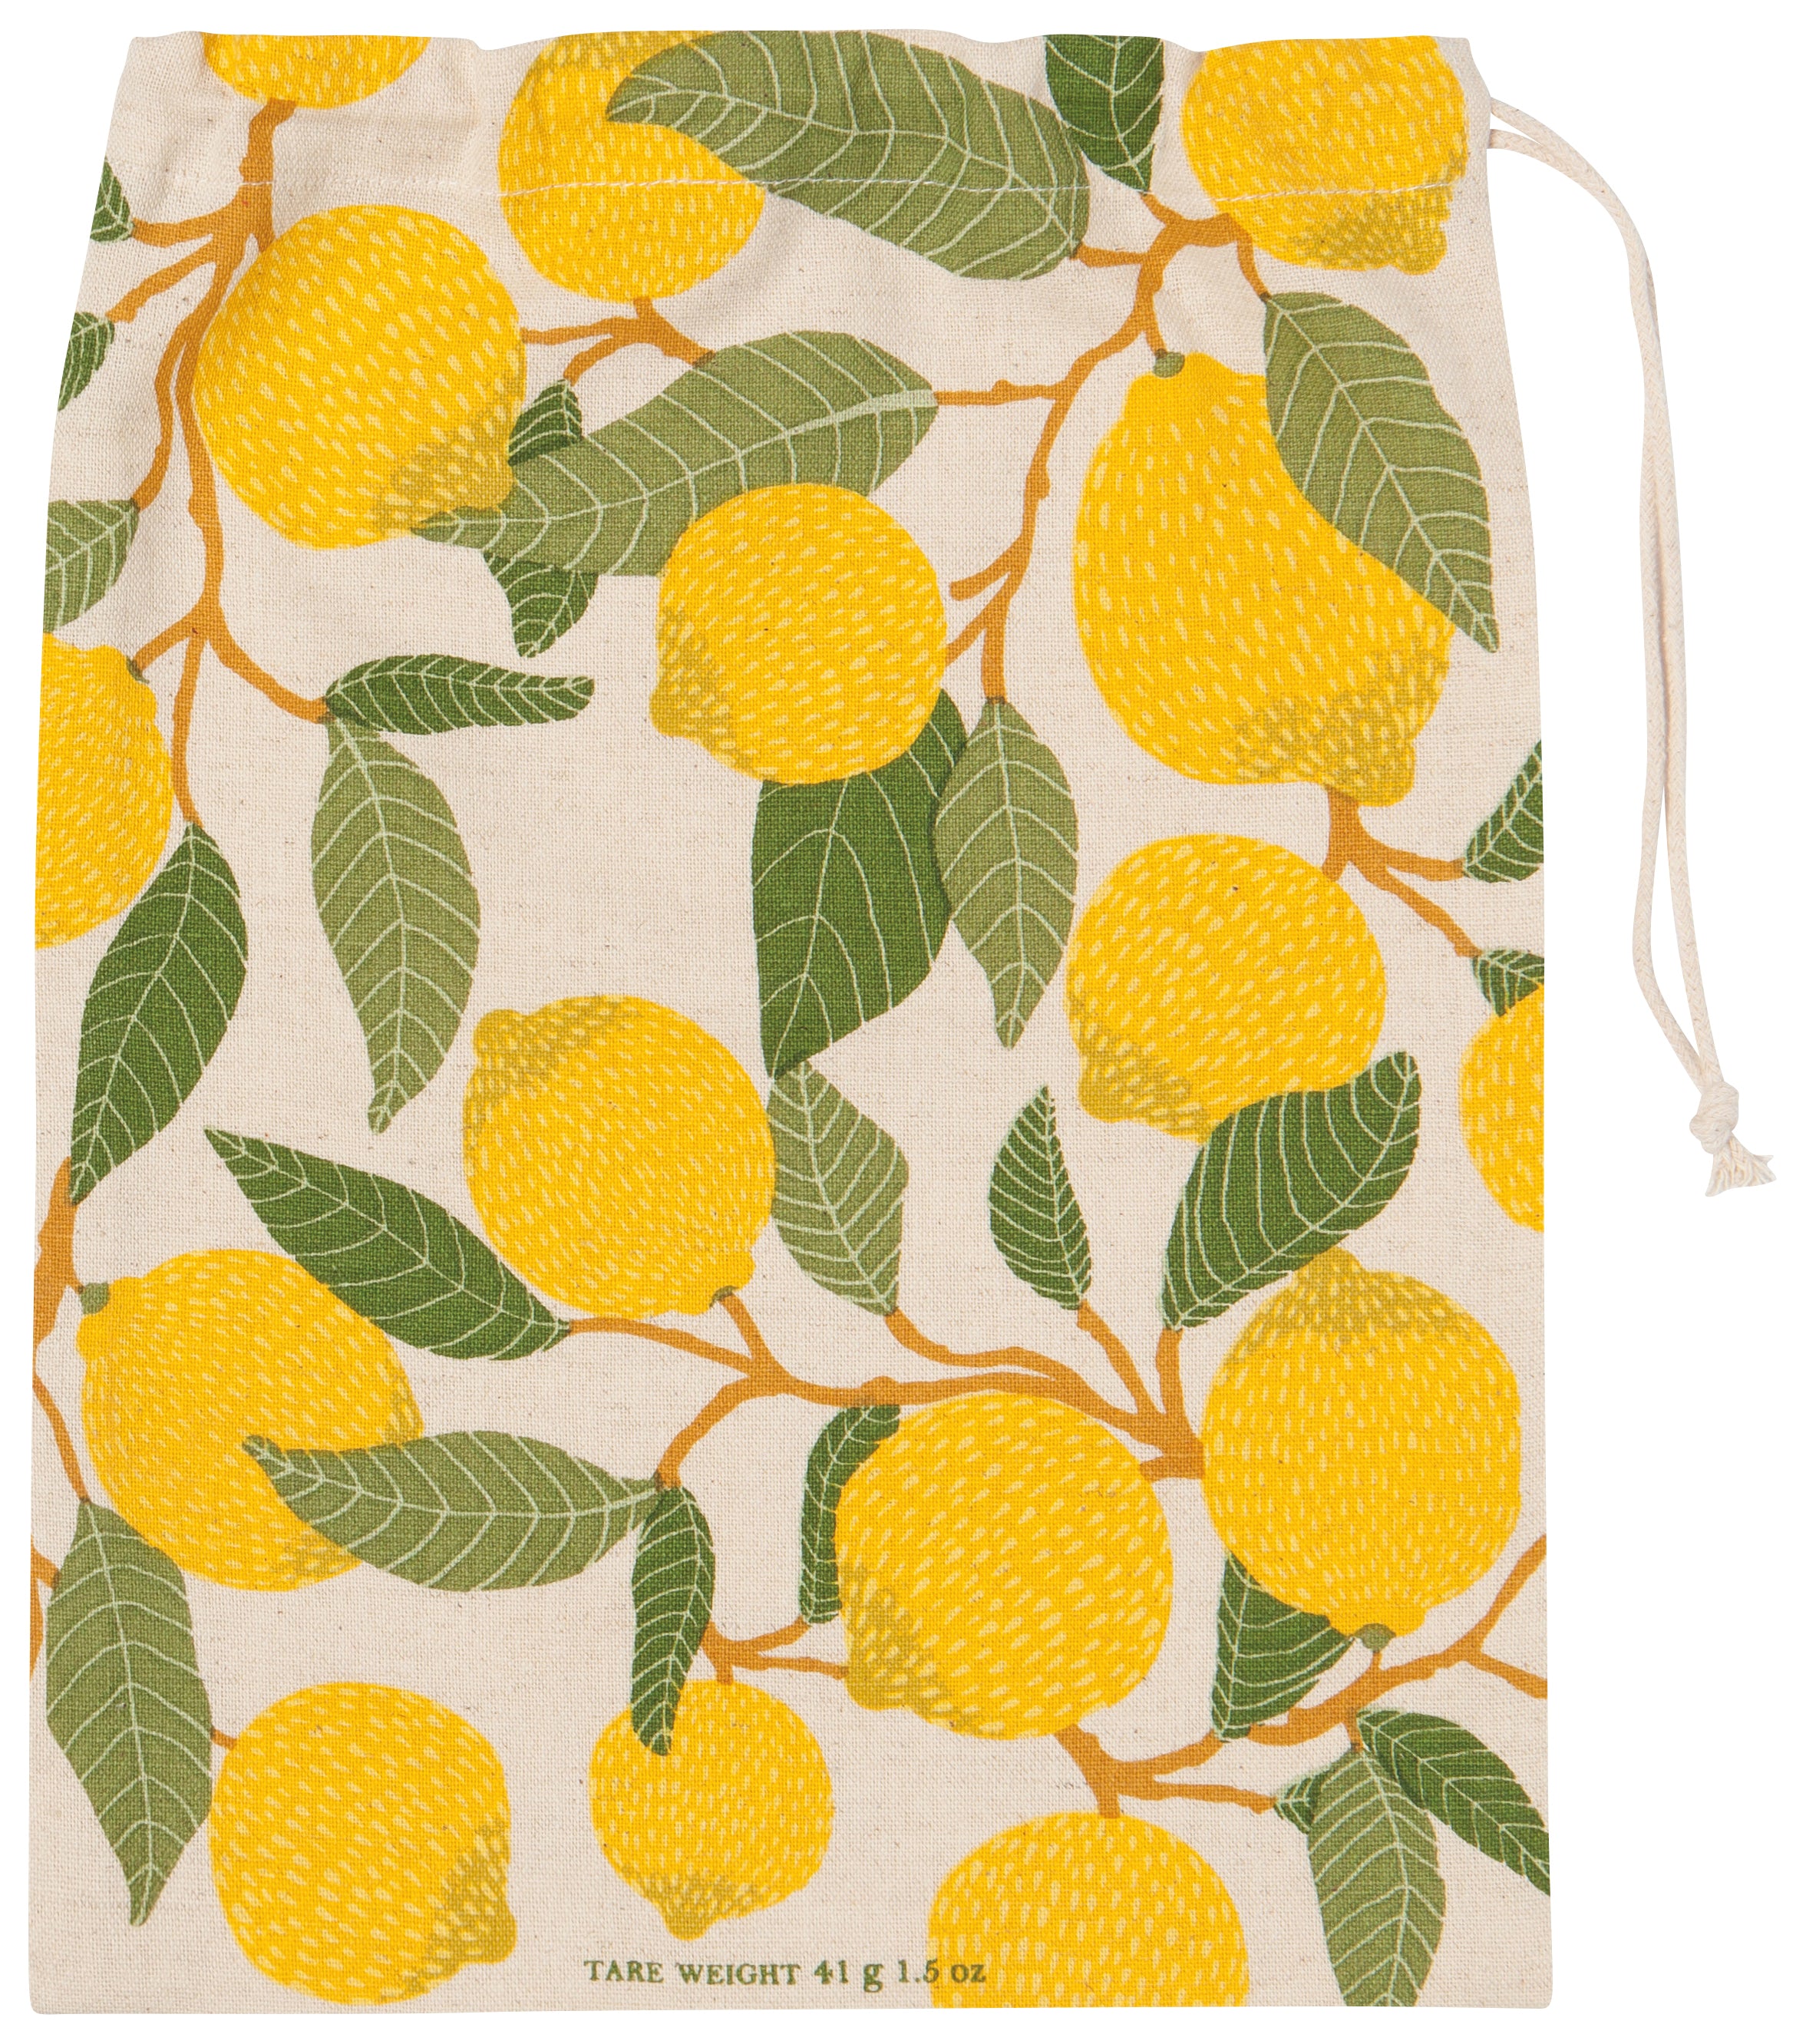 Off white pouch with a vintage portrayal of lemons 